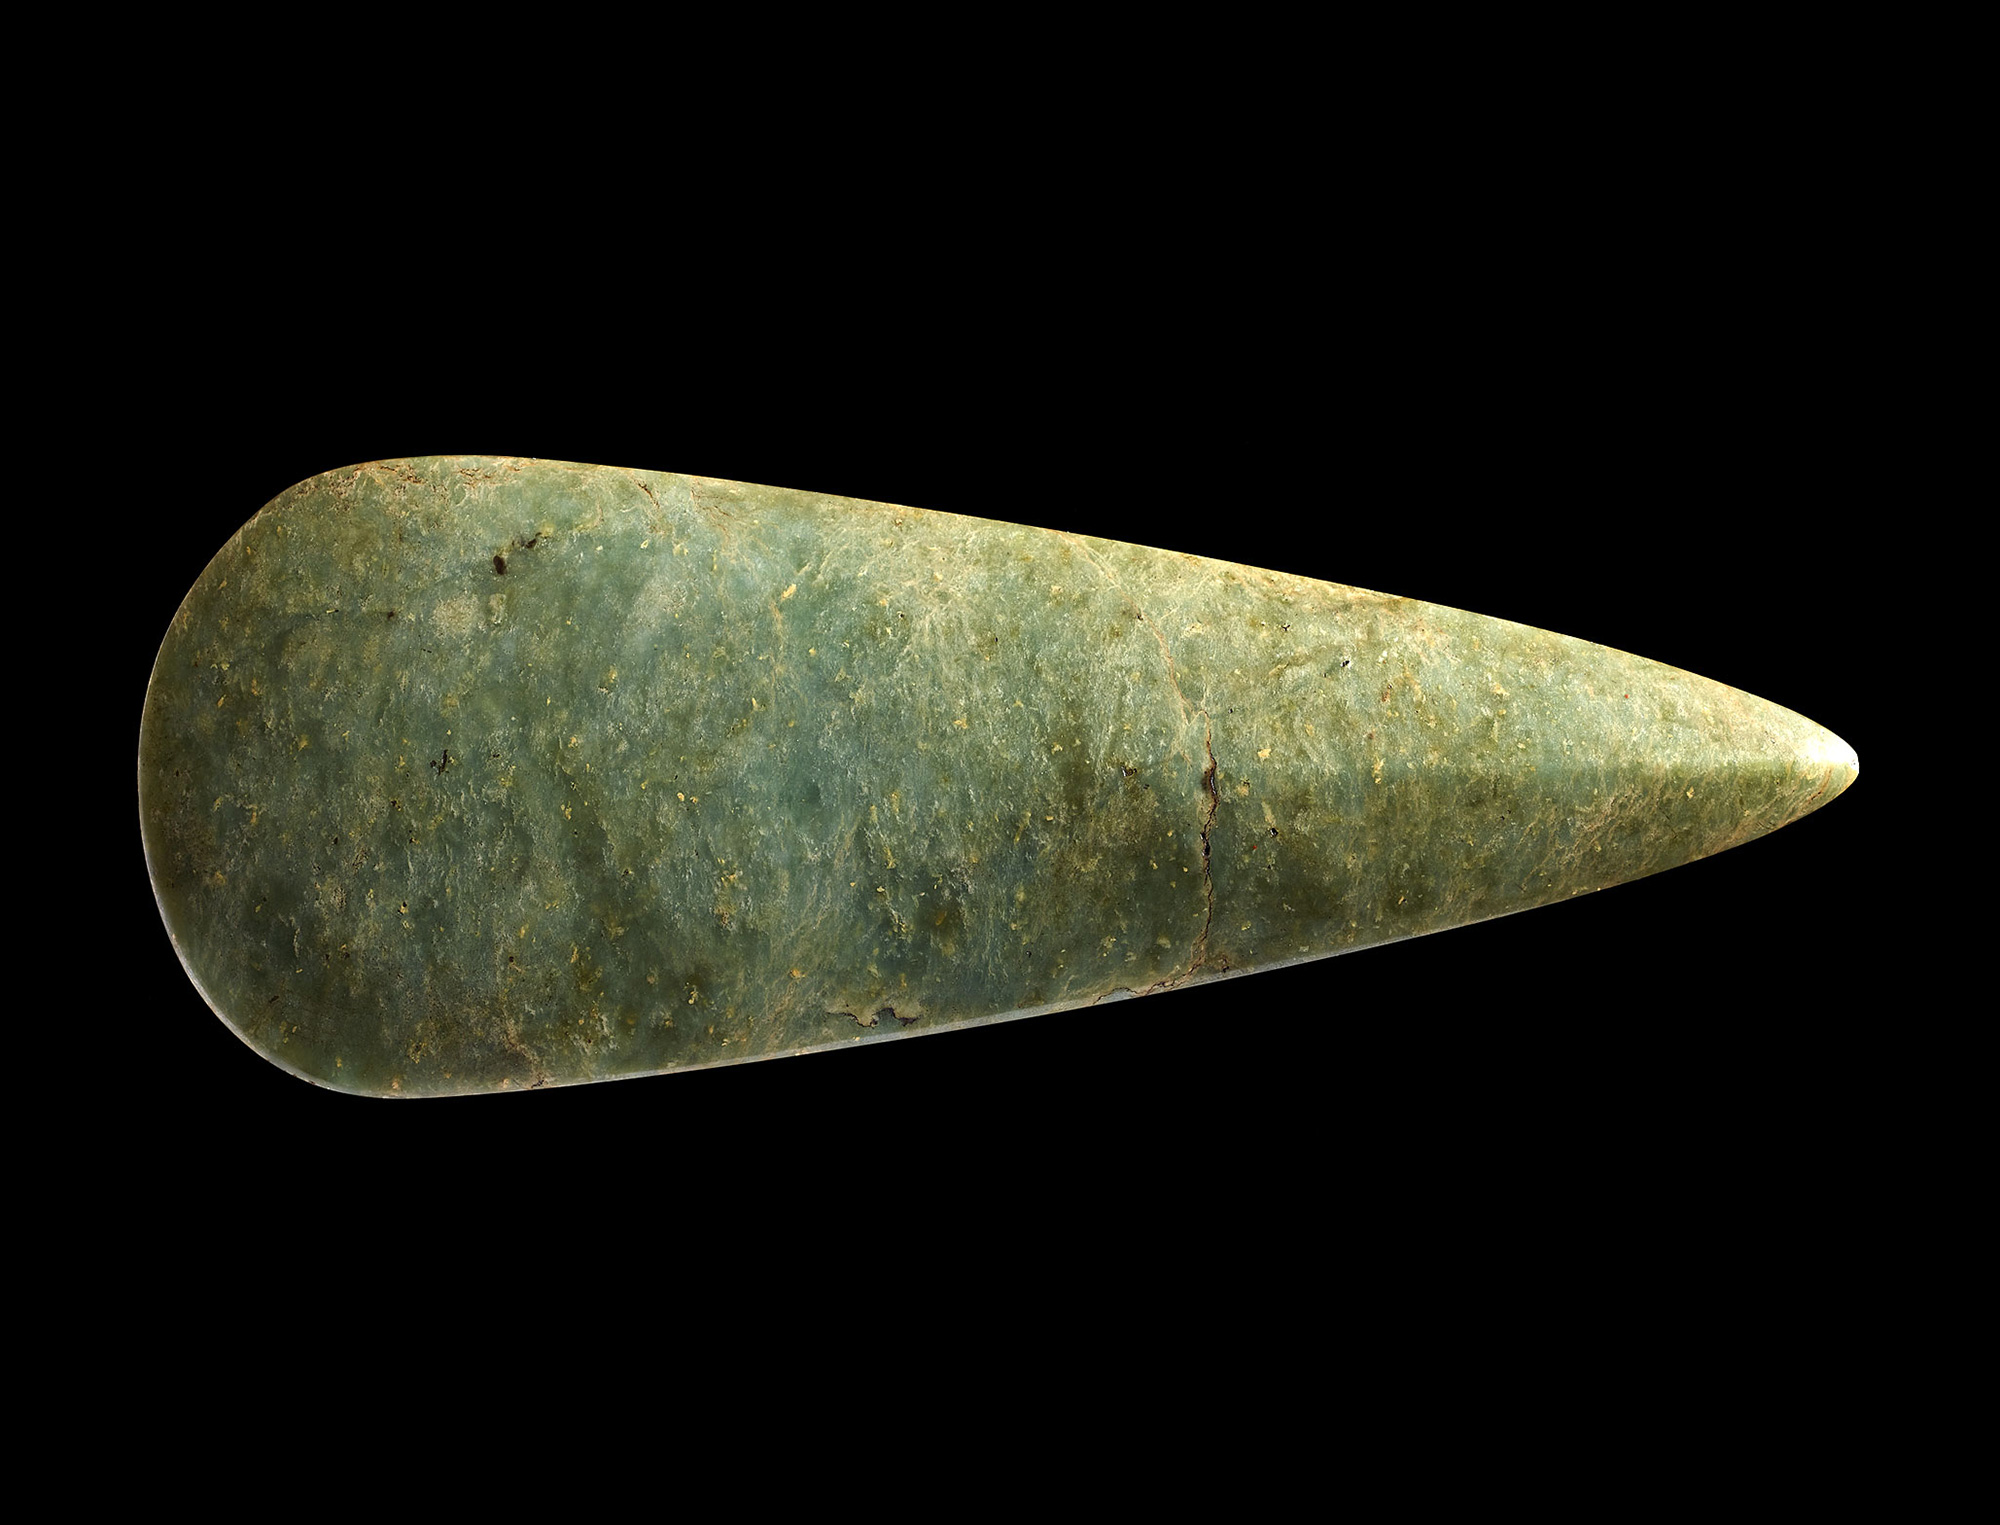 Polishing this jade stone axe for hundreds of hours gave it an intense shine and emphasised its green colour, making it highly prized